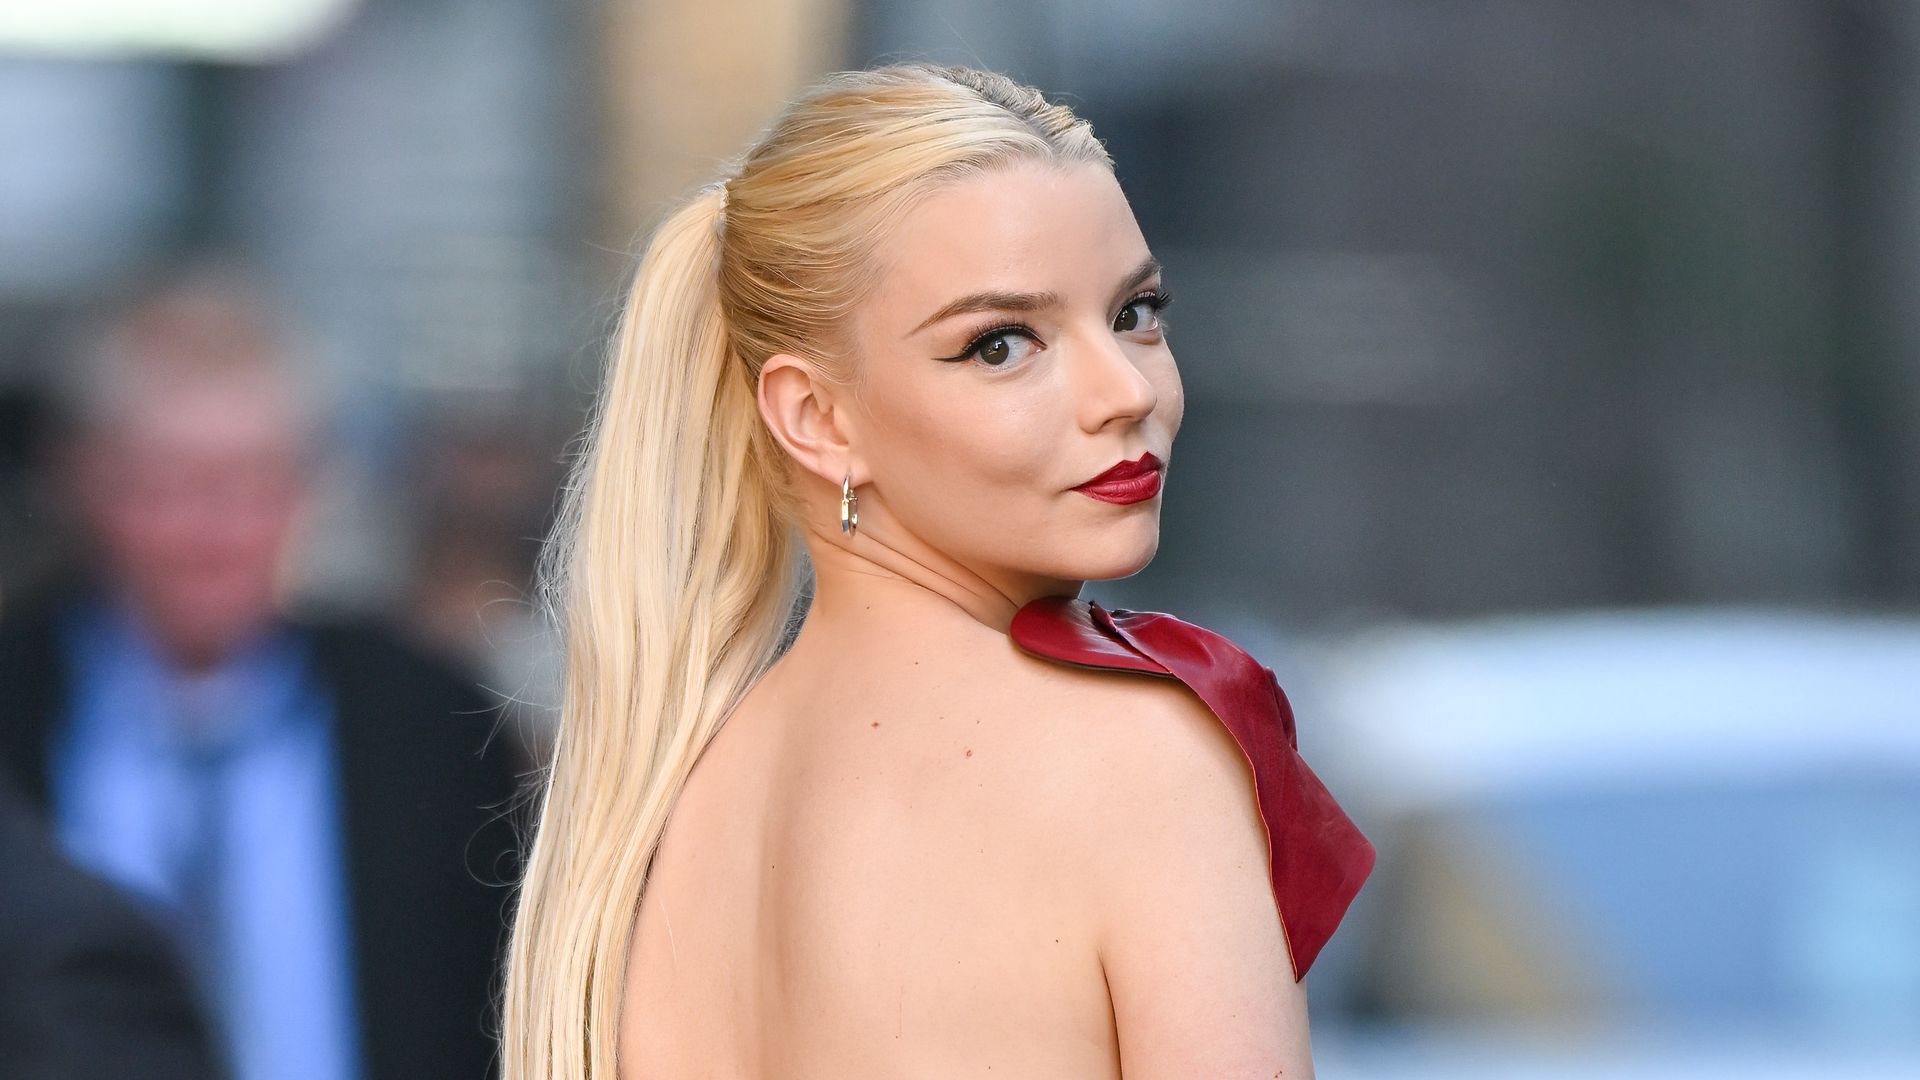 Anya Taylor-Joy's sultry red leather mini dress is her edgiest yet